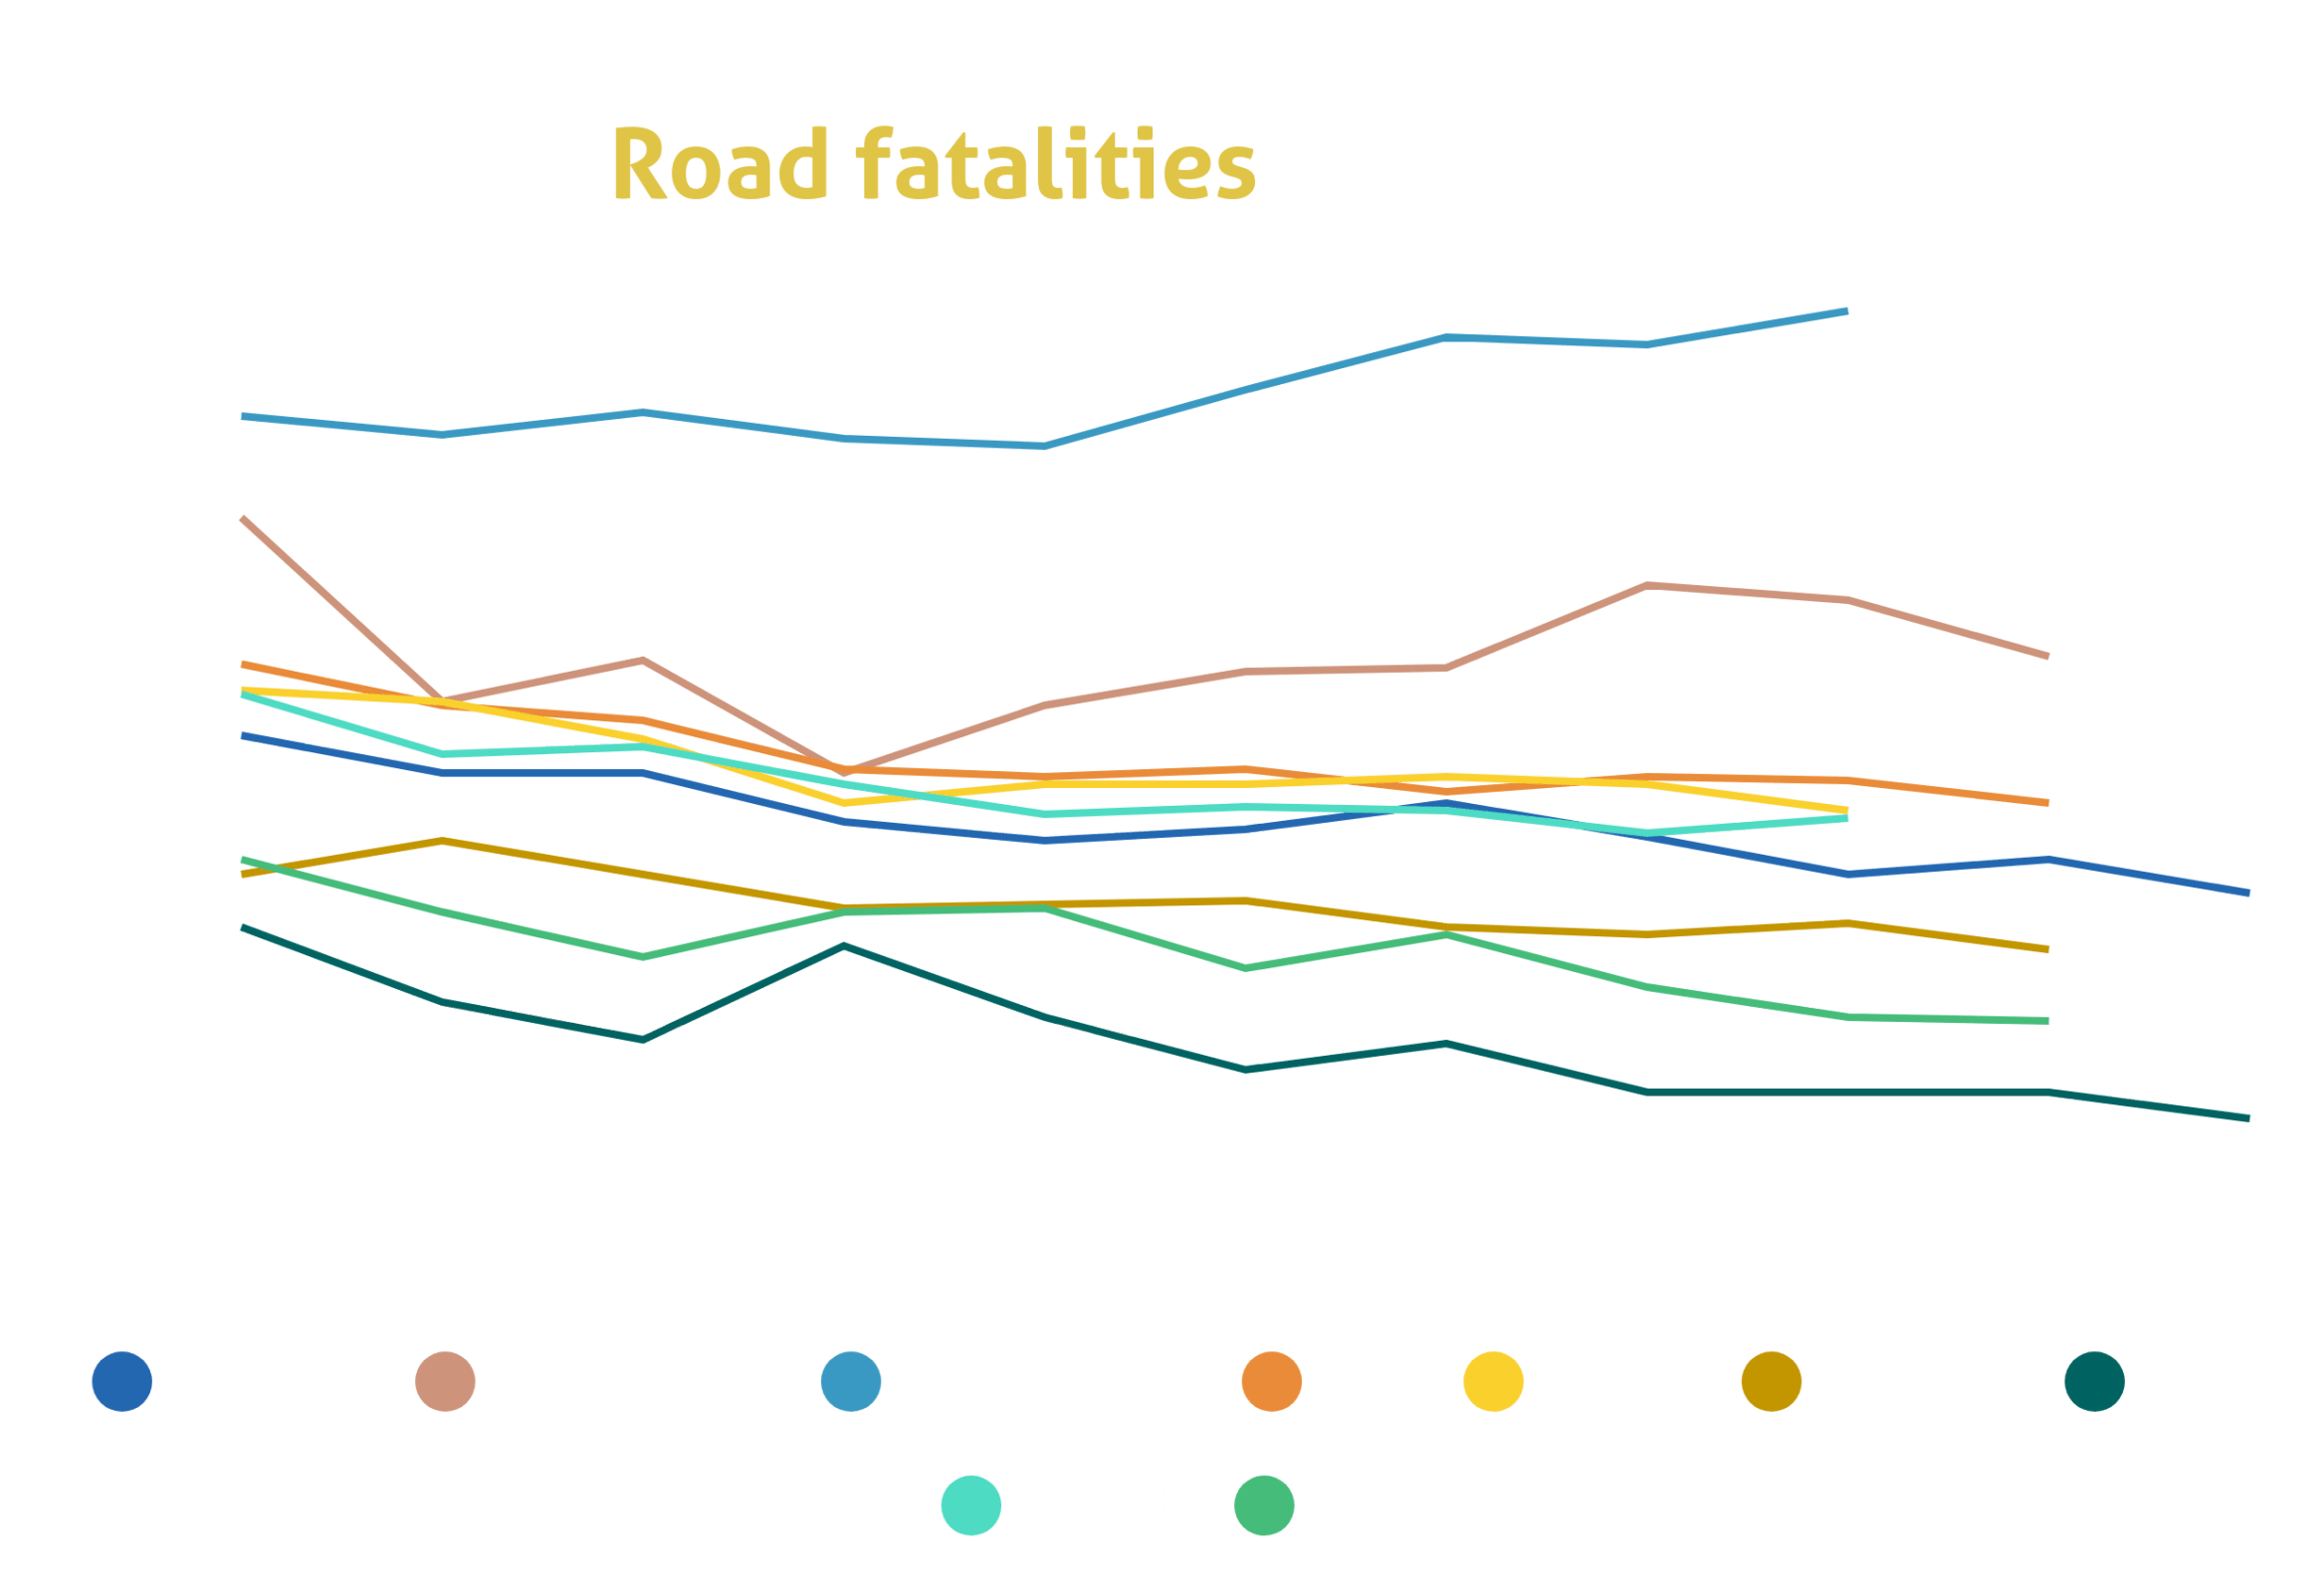 a line chart showing road fatality rates for multiple countries across the world